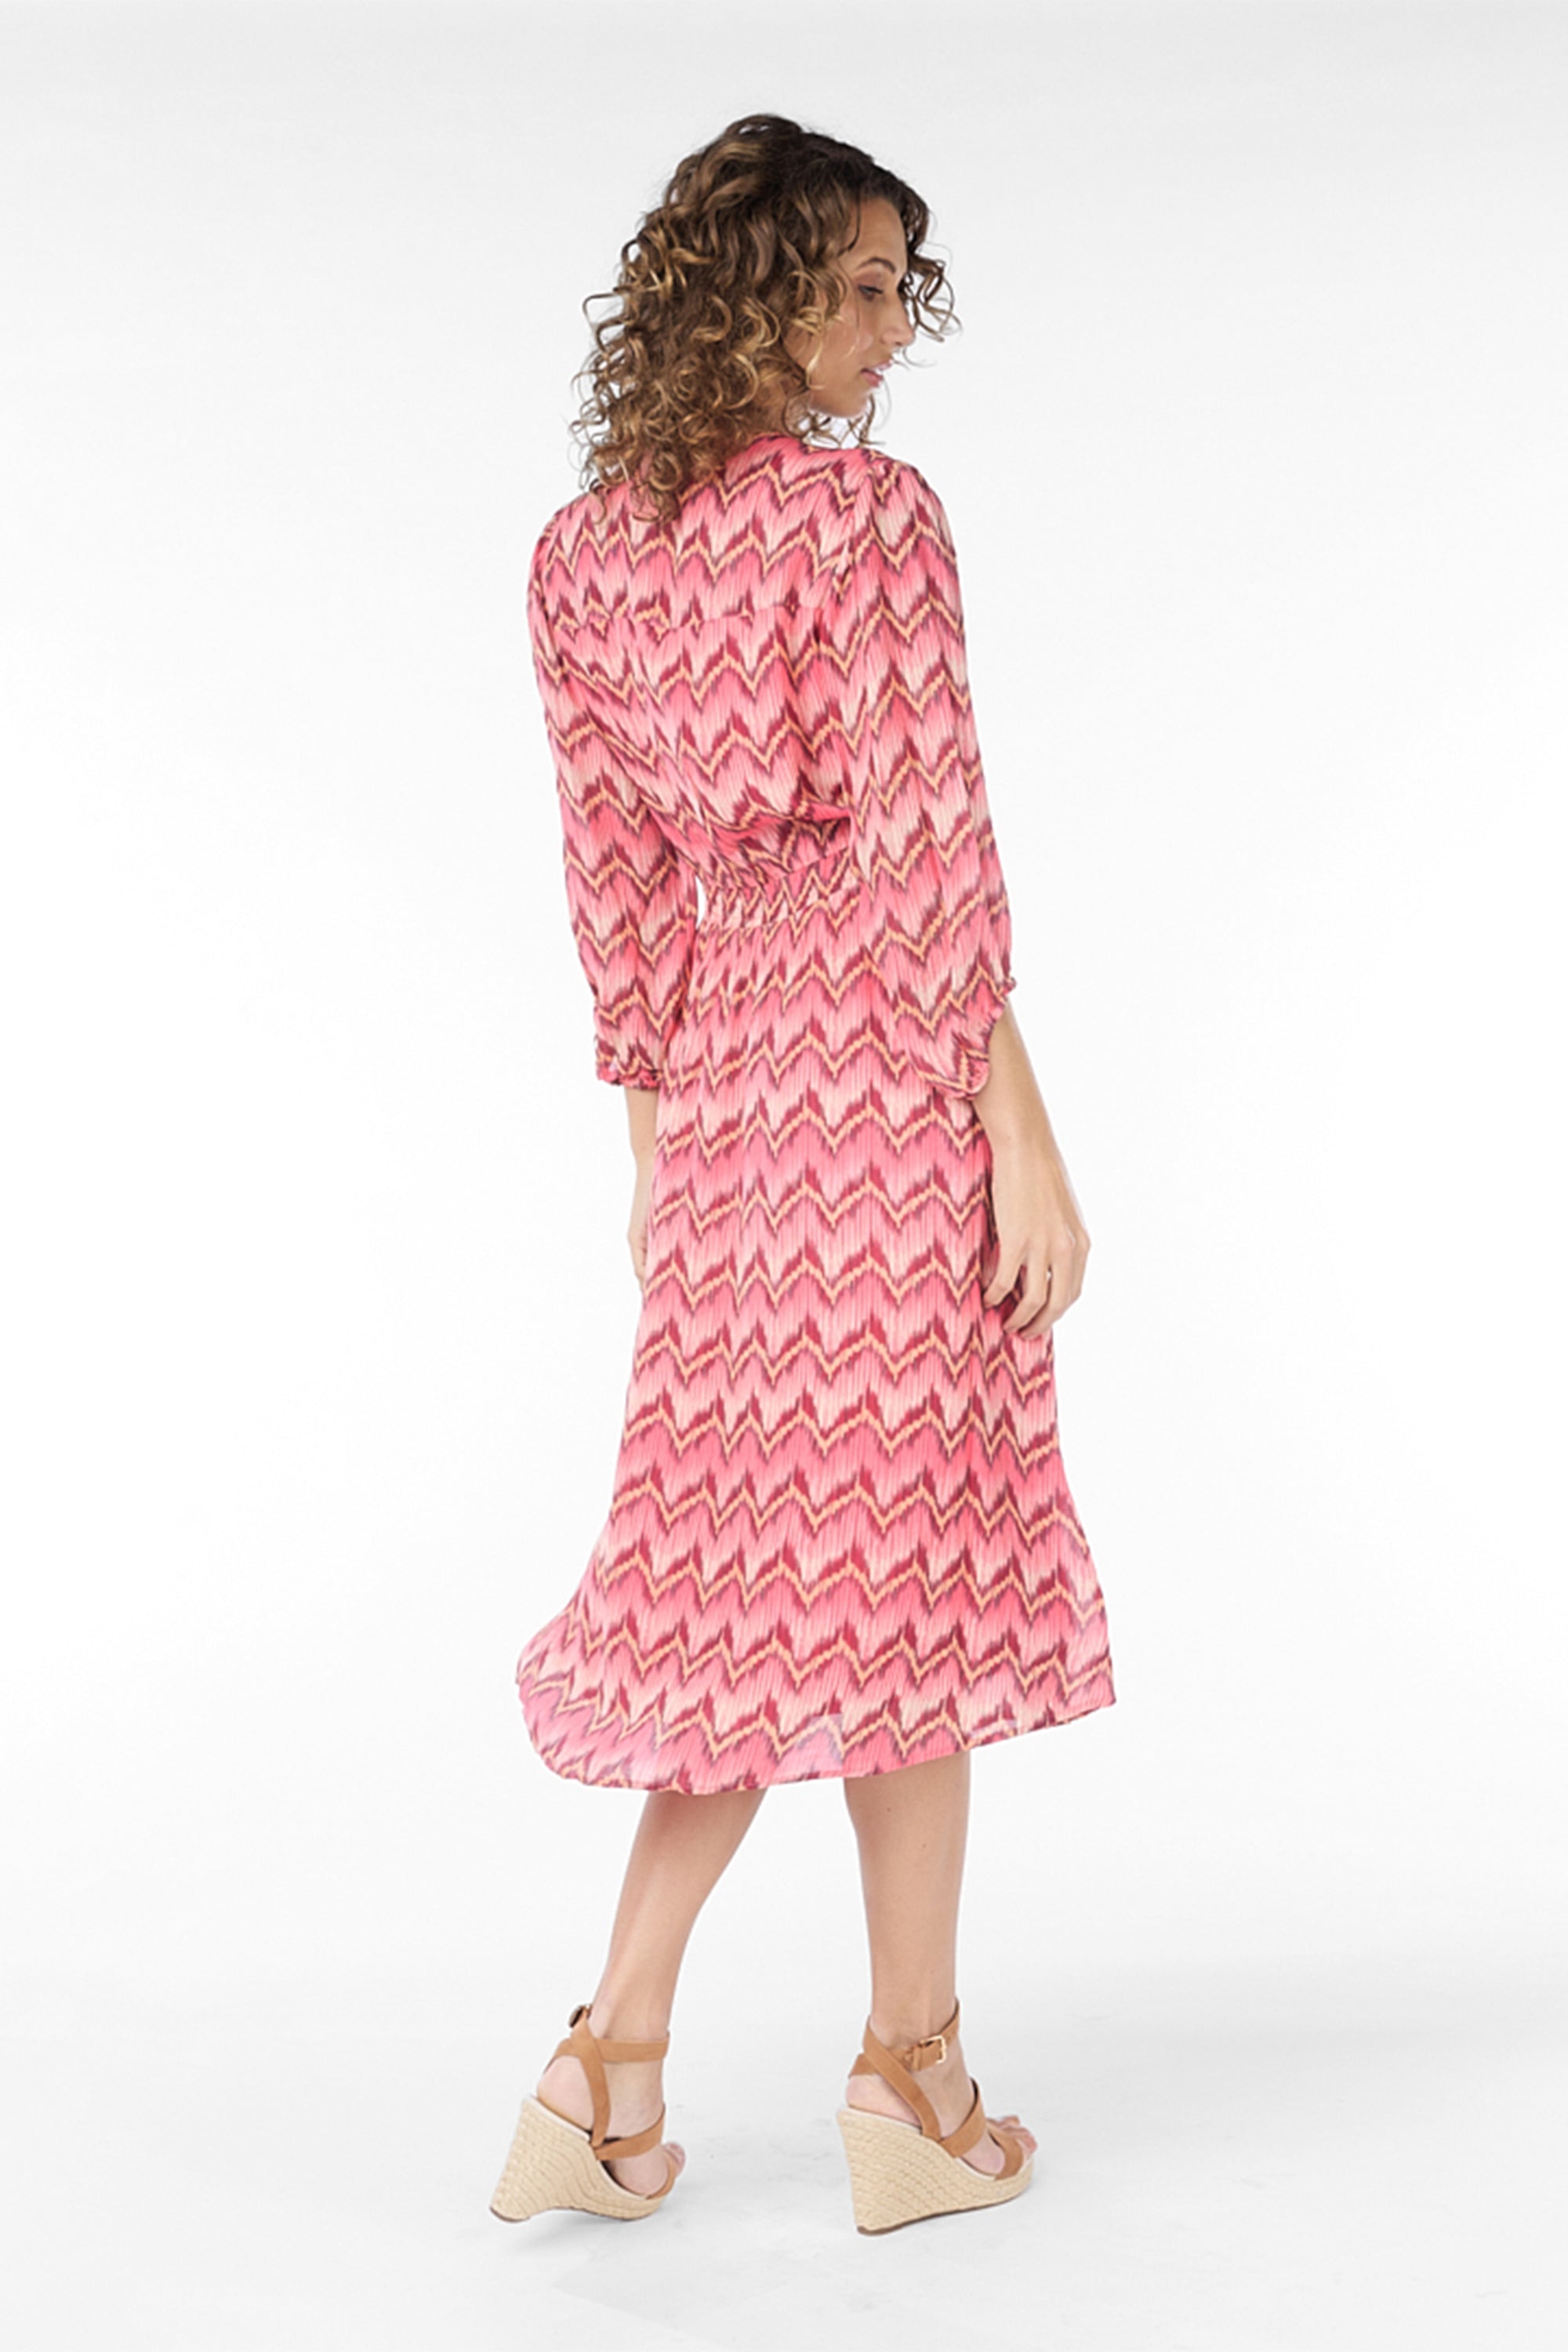 Back view of Esqualo (SP2414008) Women's 3/4 Sleeve V-Neck Midi Day Dress in a Pink ZigZag Print